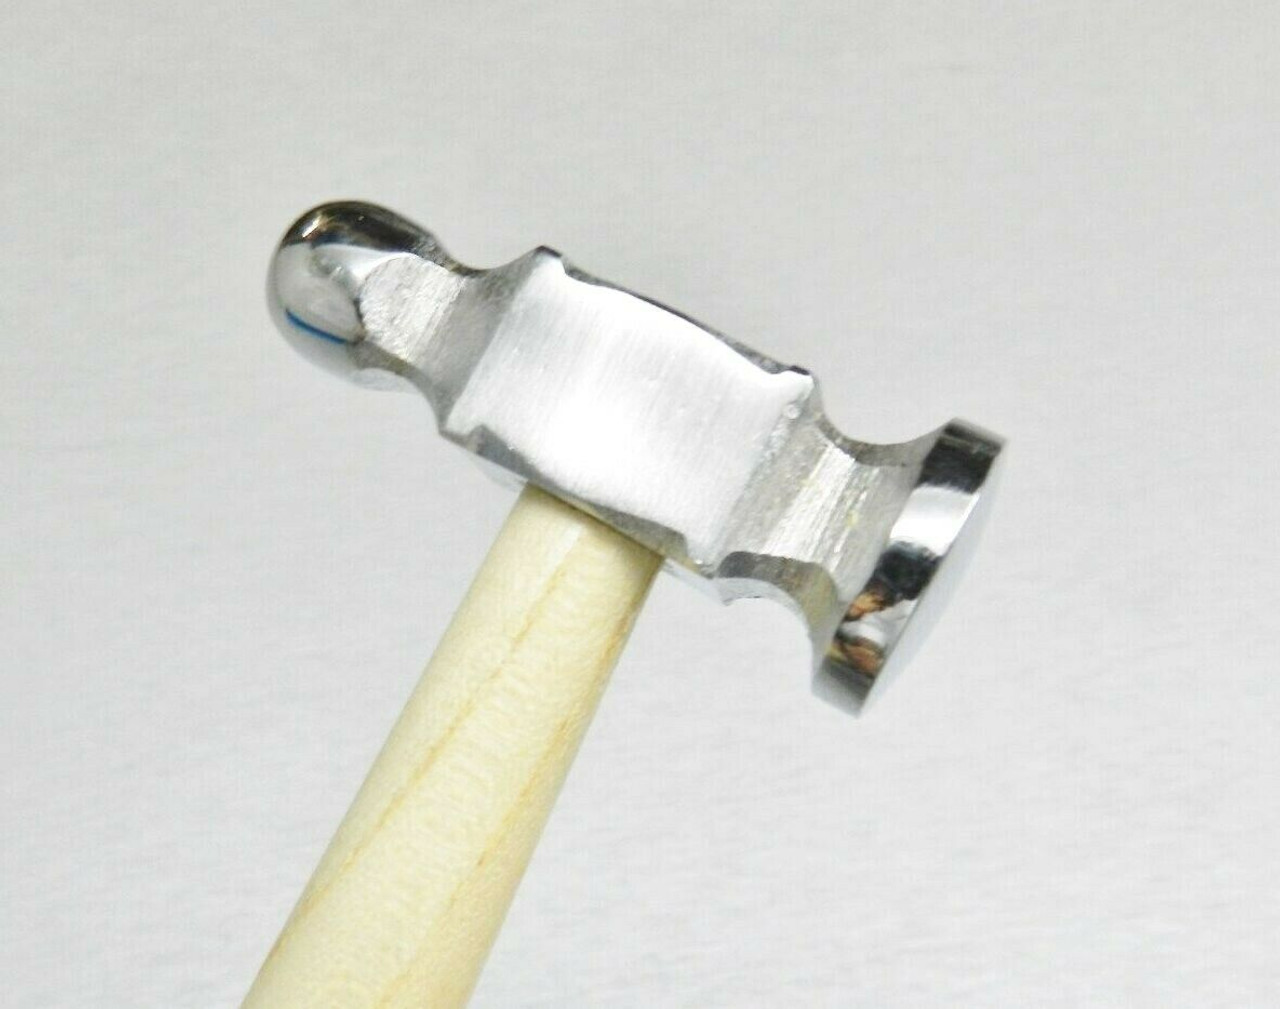 Jewelers Chasing Hammer Metalwork Domed Hammer Bowed Face 1-1/4"